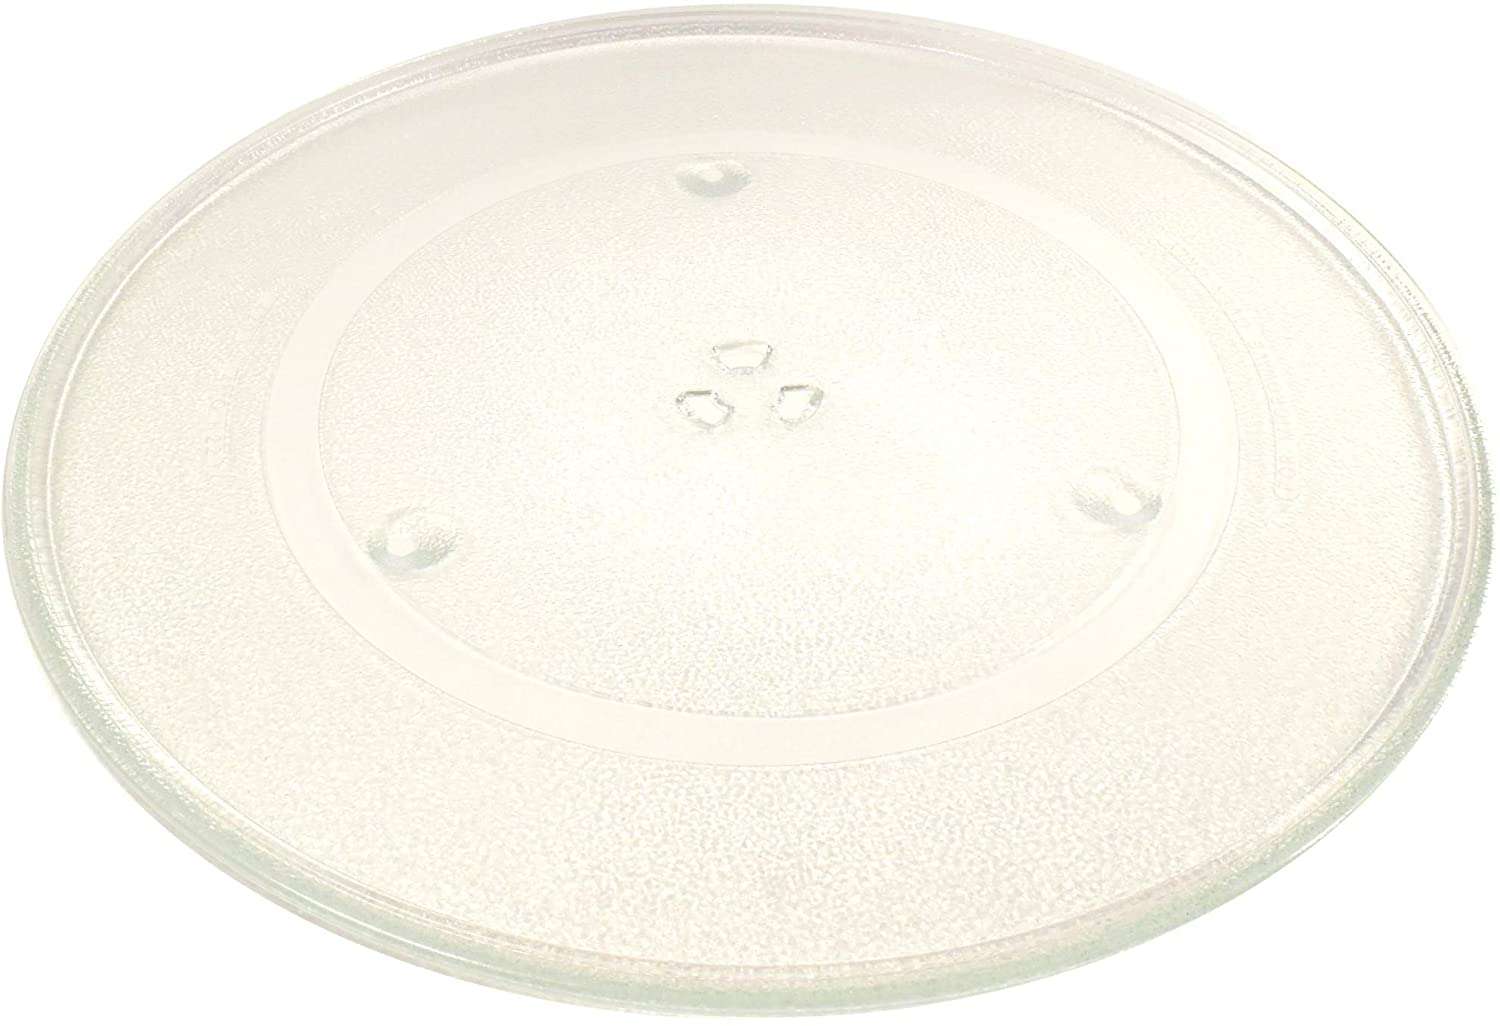 HQRP 16 1/2" Glass Turntable Tray Compatible with Bosch 00487763 HMB5060 HMB5051 HMB5050 HBL5750UC HBL5750UC Microwave Oven Cooking